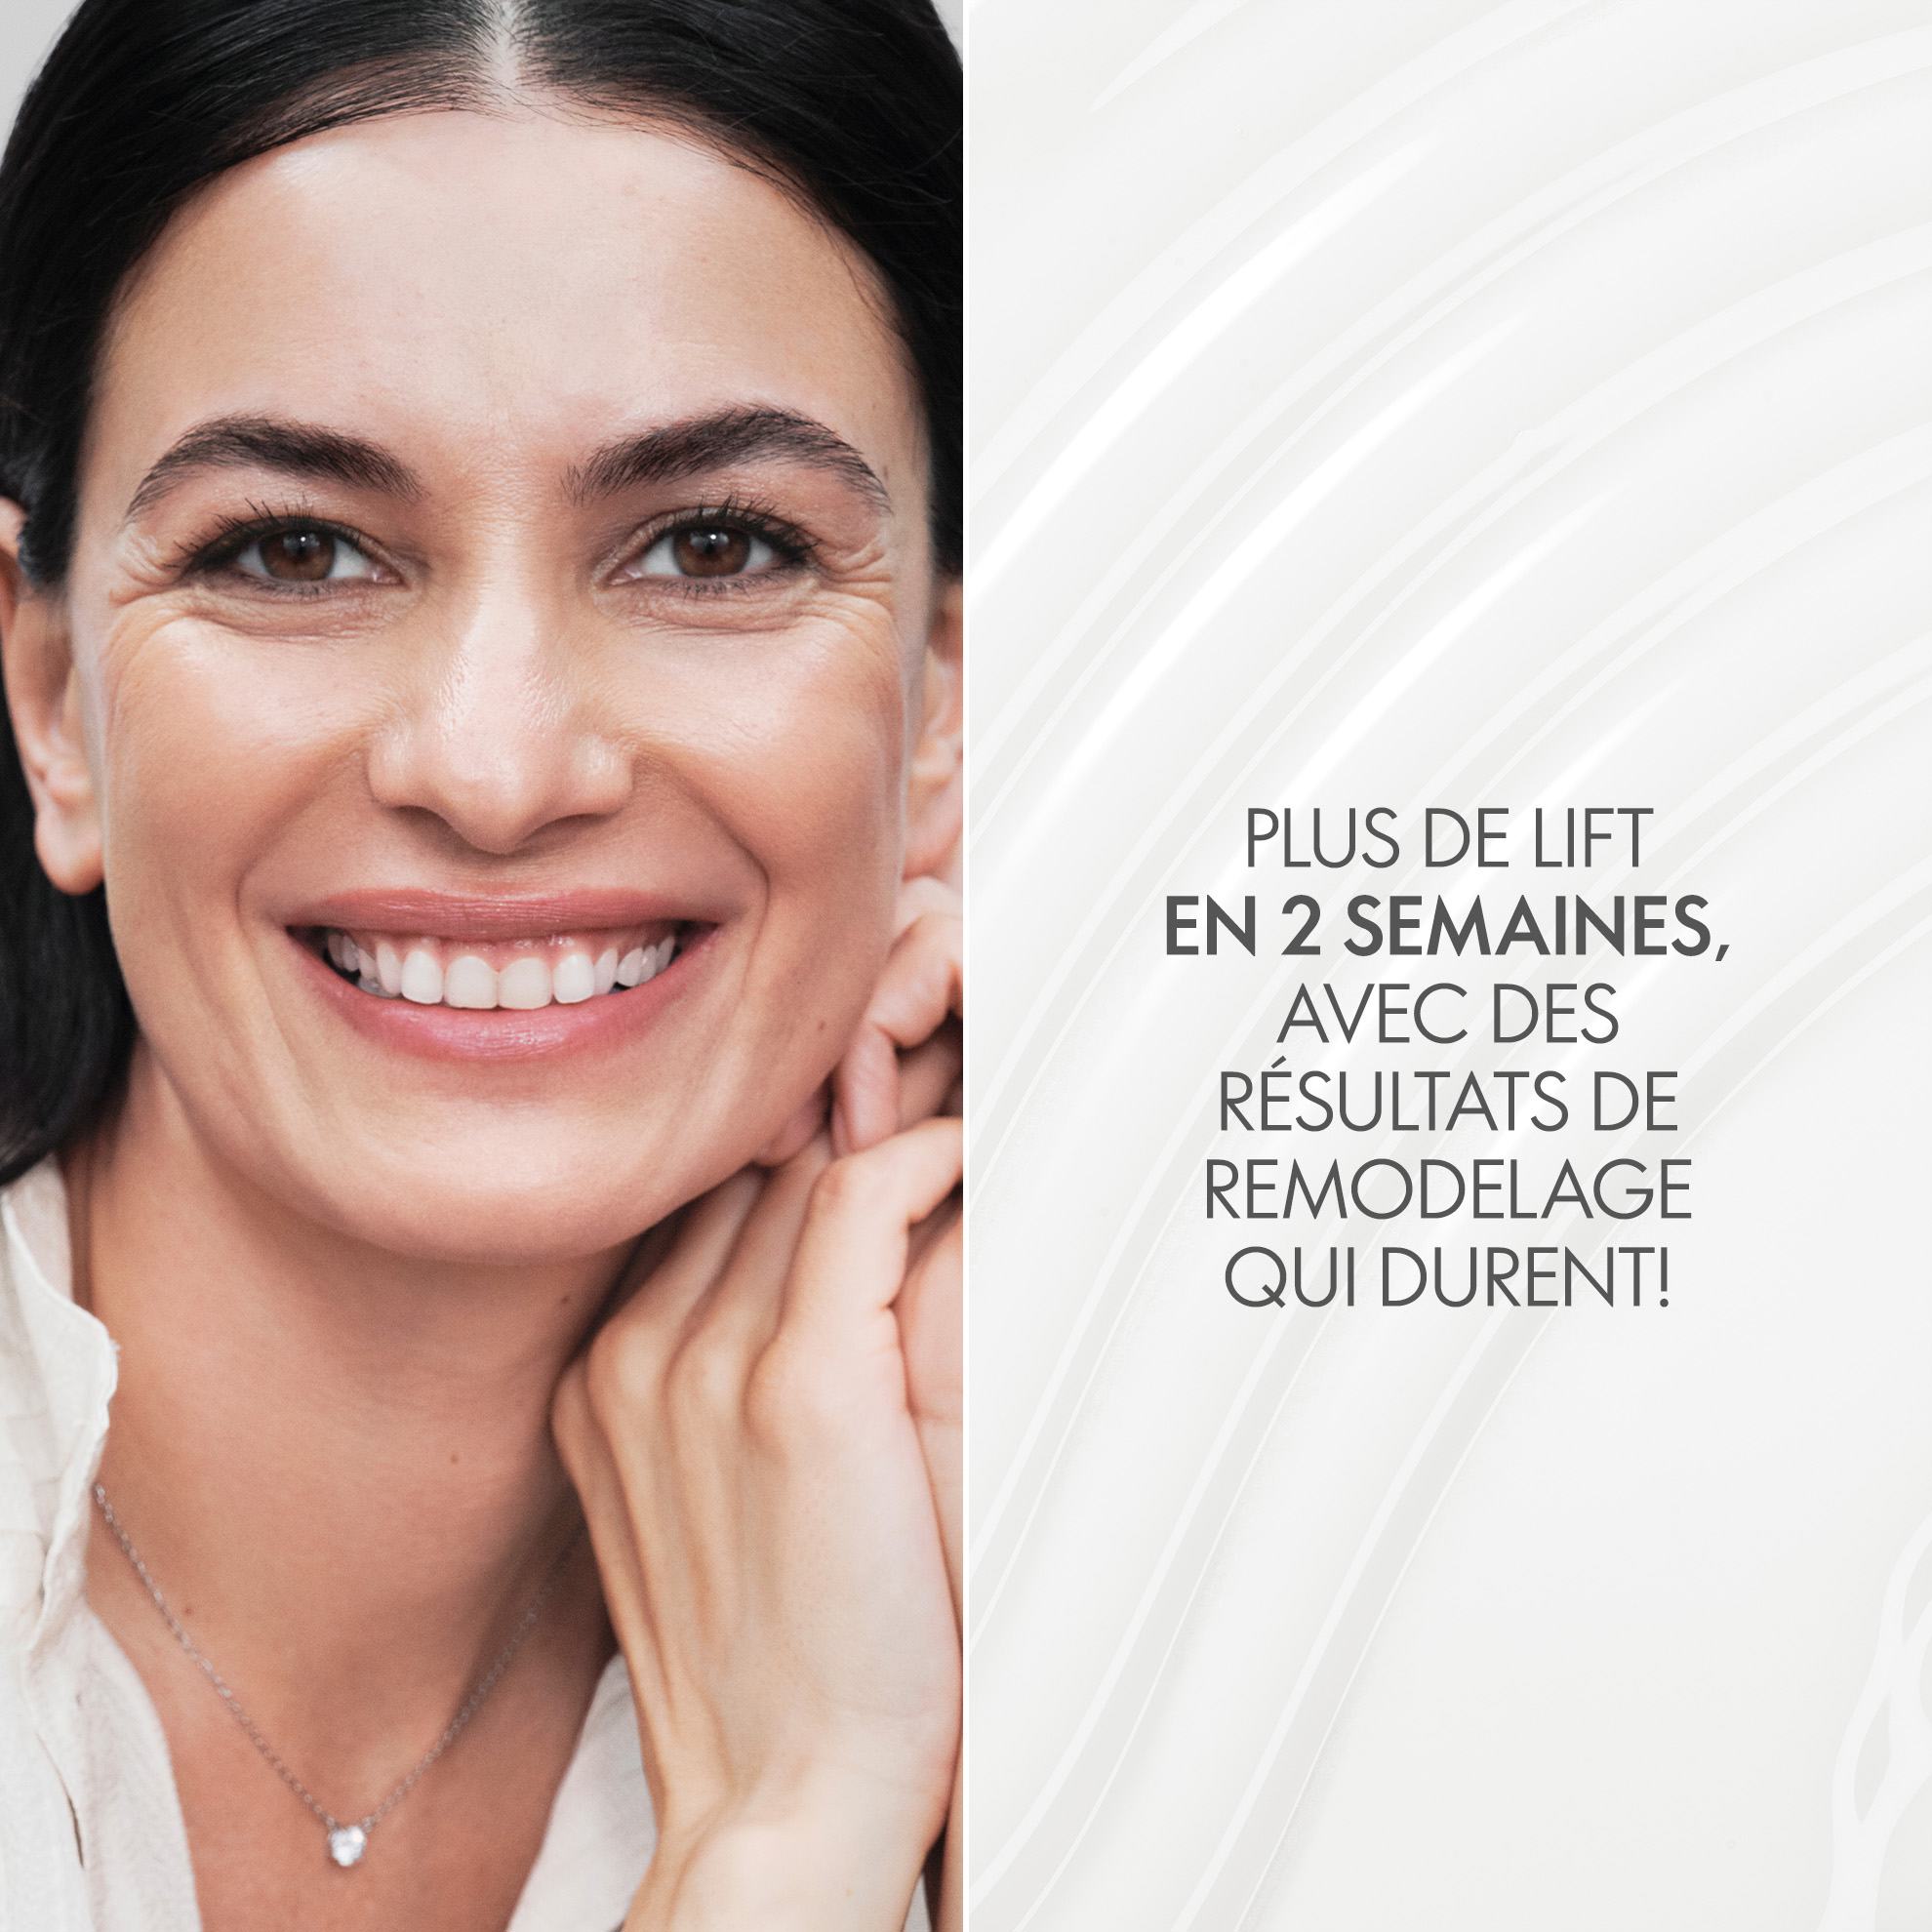 https://media-cdn.oriflame.com/productImage?externalMediaId=product-management-media%2fProducts%2f43691%2fTN%2f43691_2.png&id=18291319&version=4